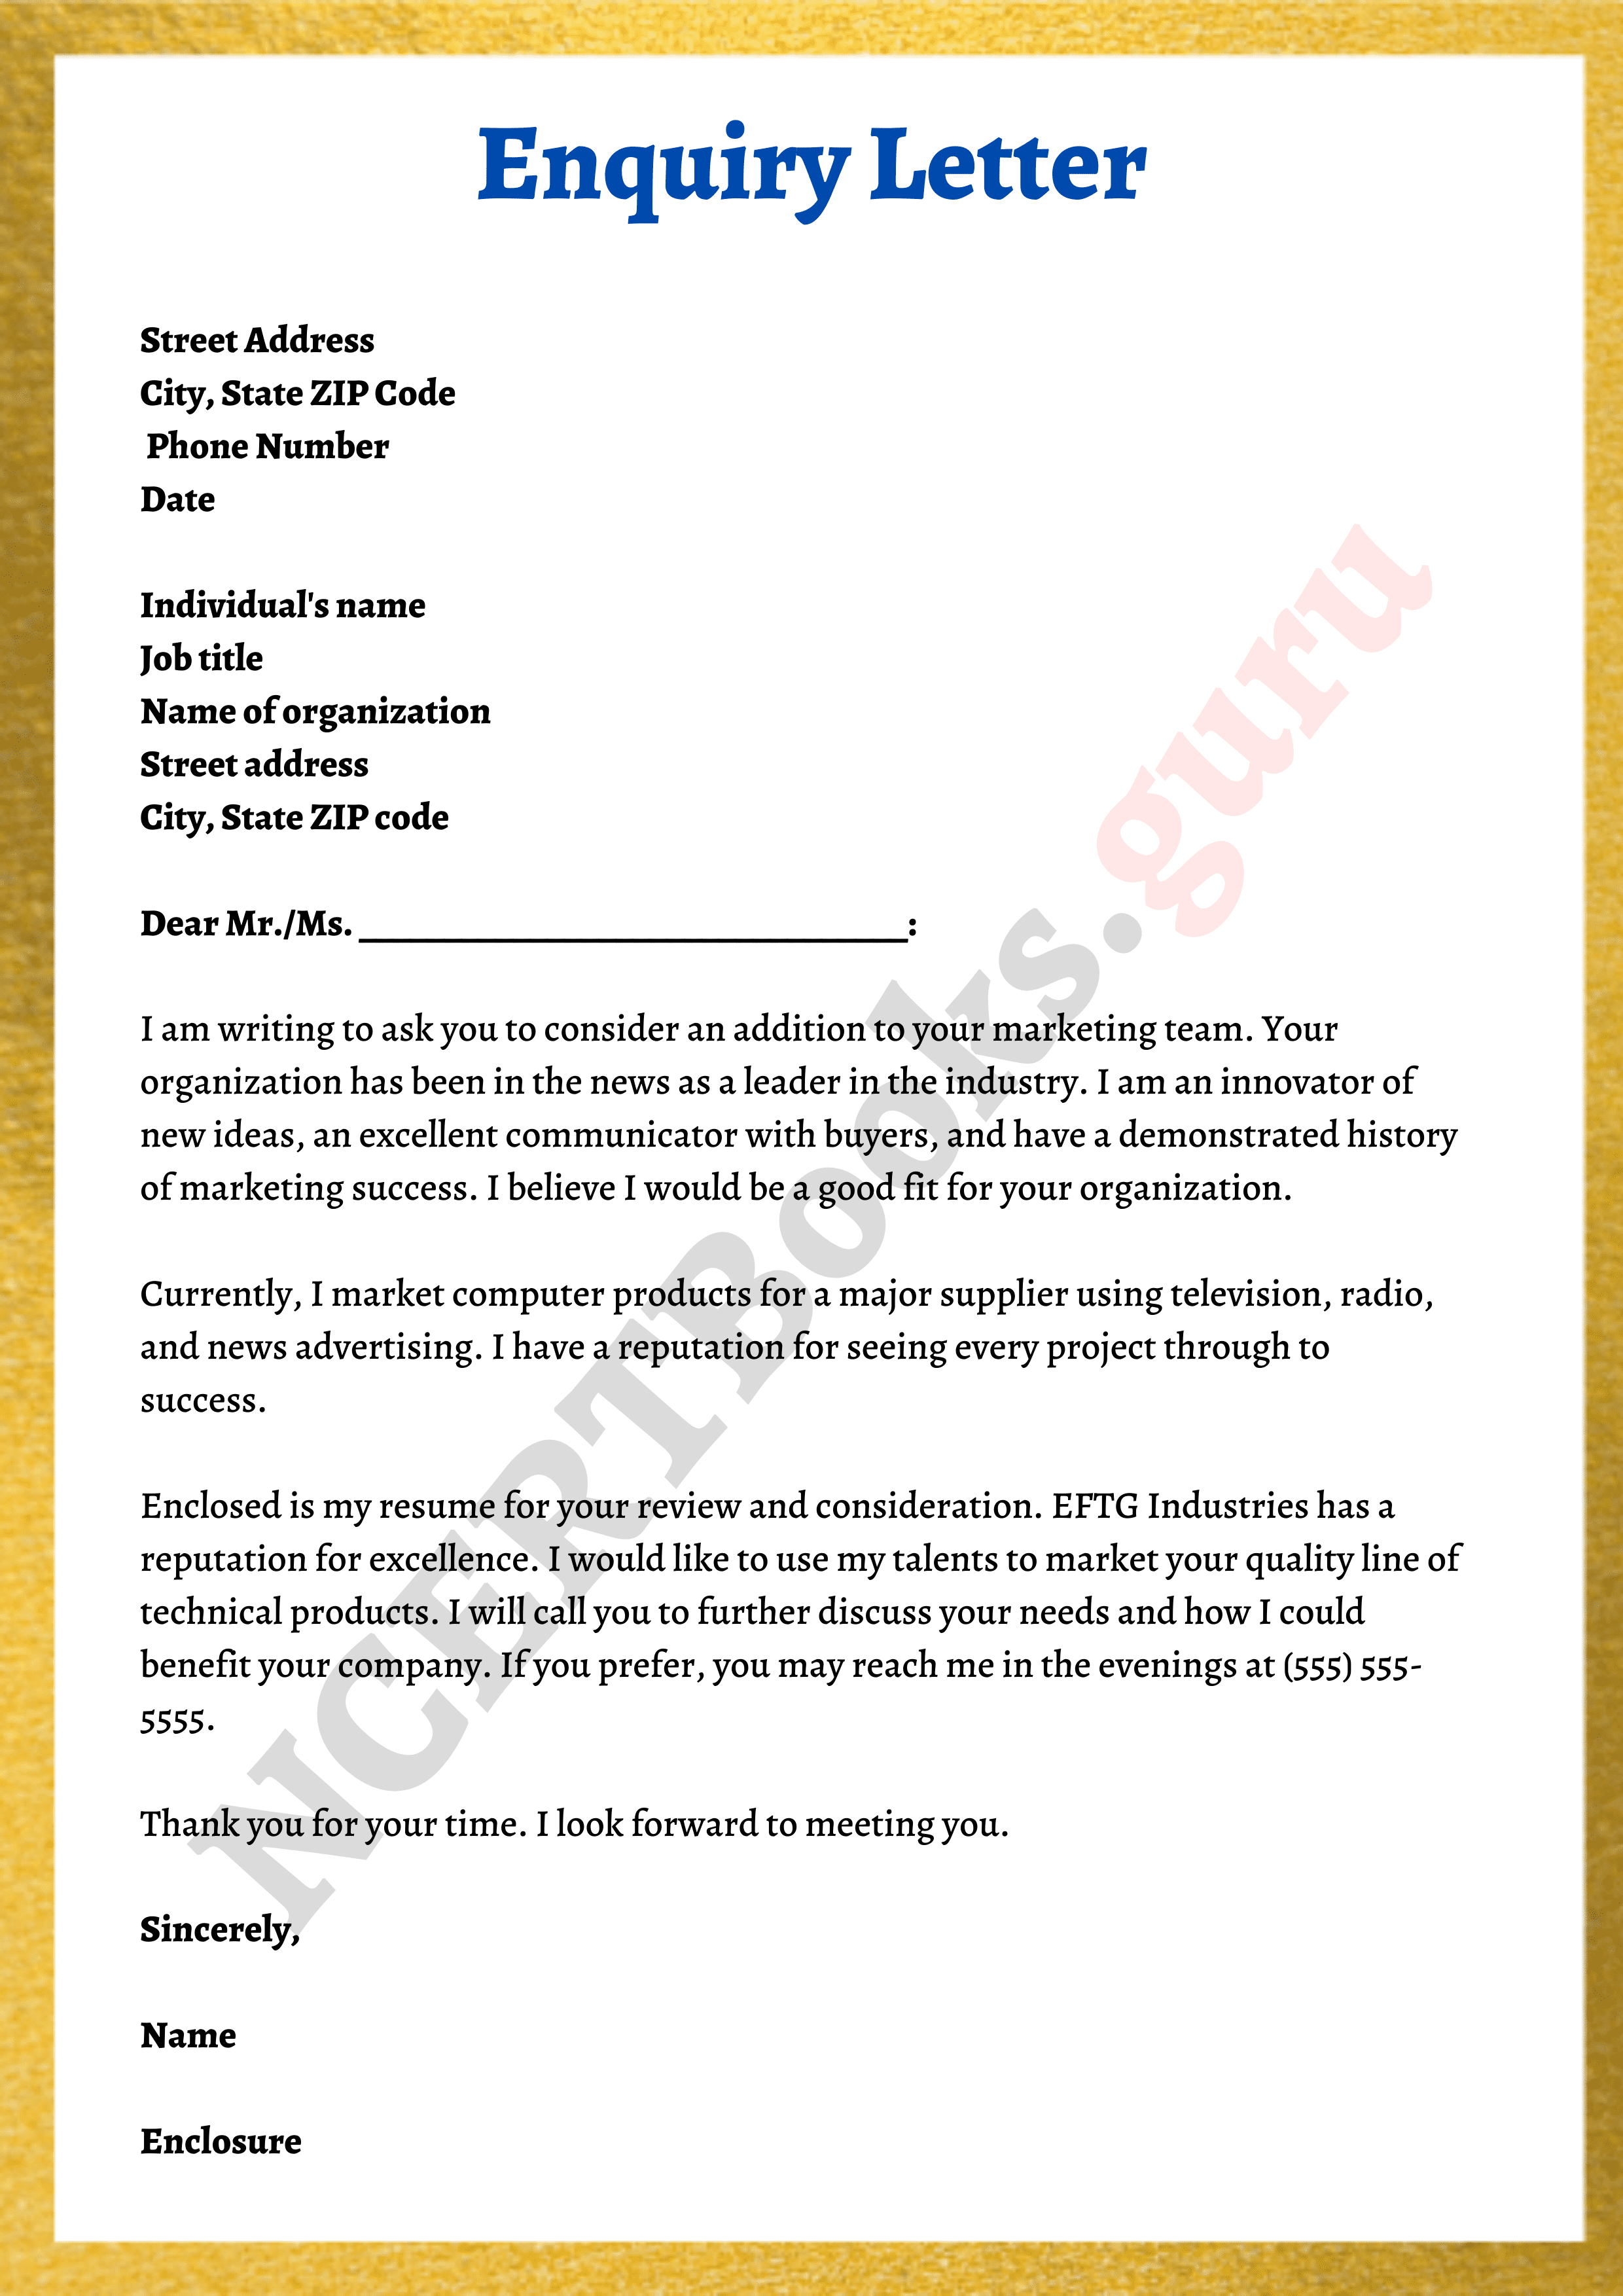 Enquiry Letter Writing Format, Samples | How to write an ...